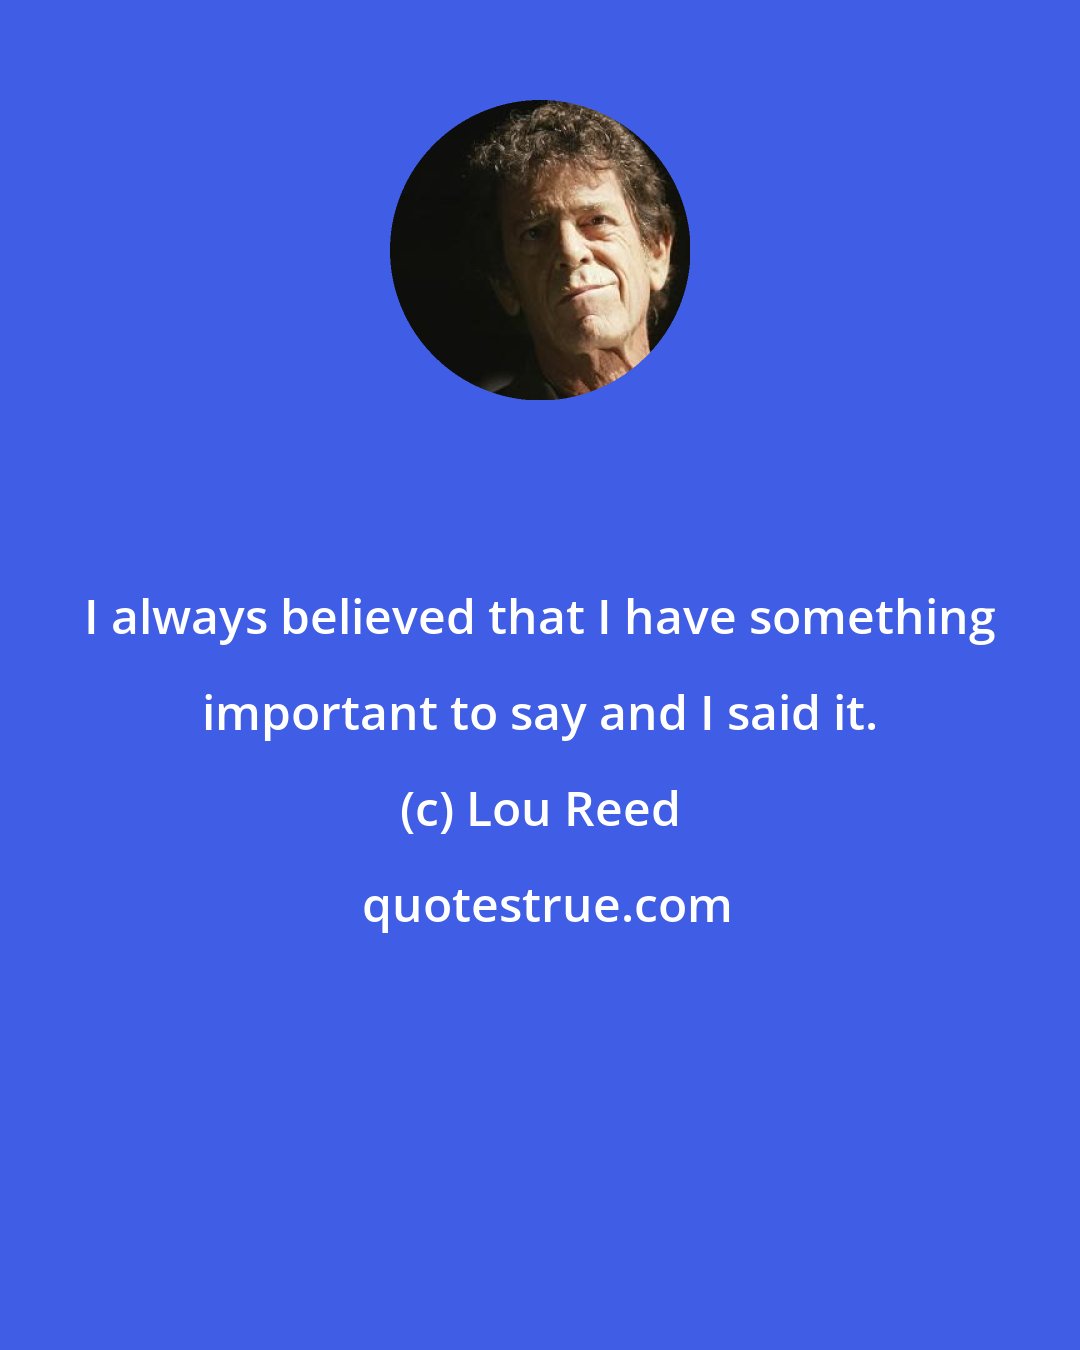 Lou Reed: I always believed that I have something important to say and I said it.